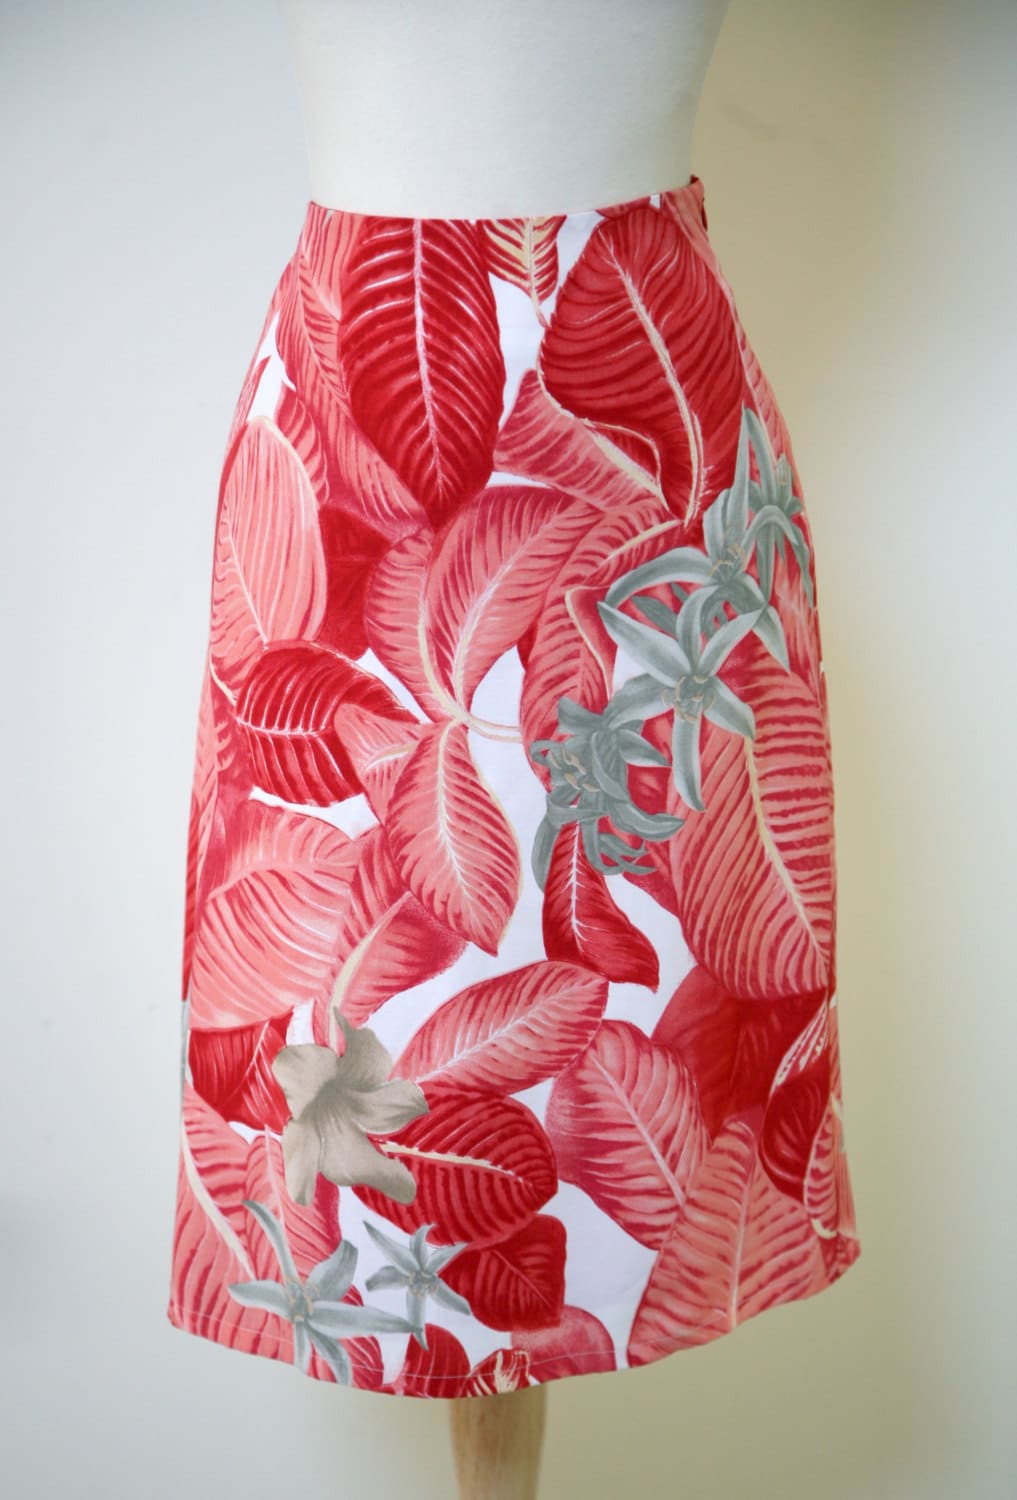 Red Coral White and Gray Tropical Print Fully Lined Skirt - Etsy